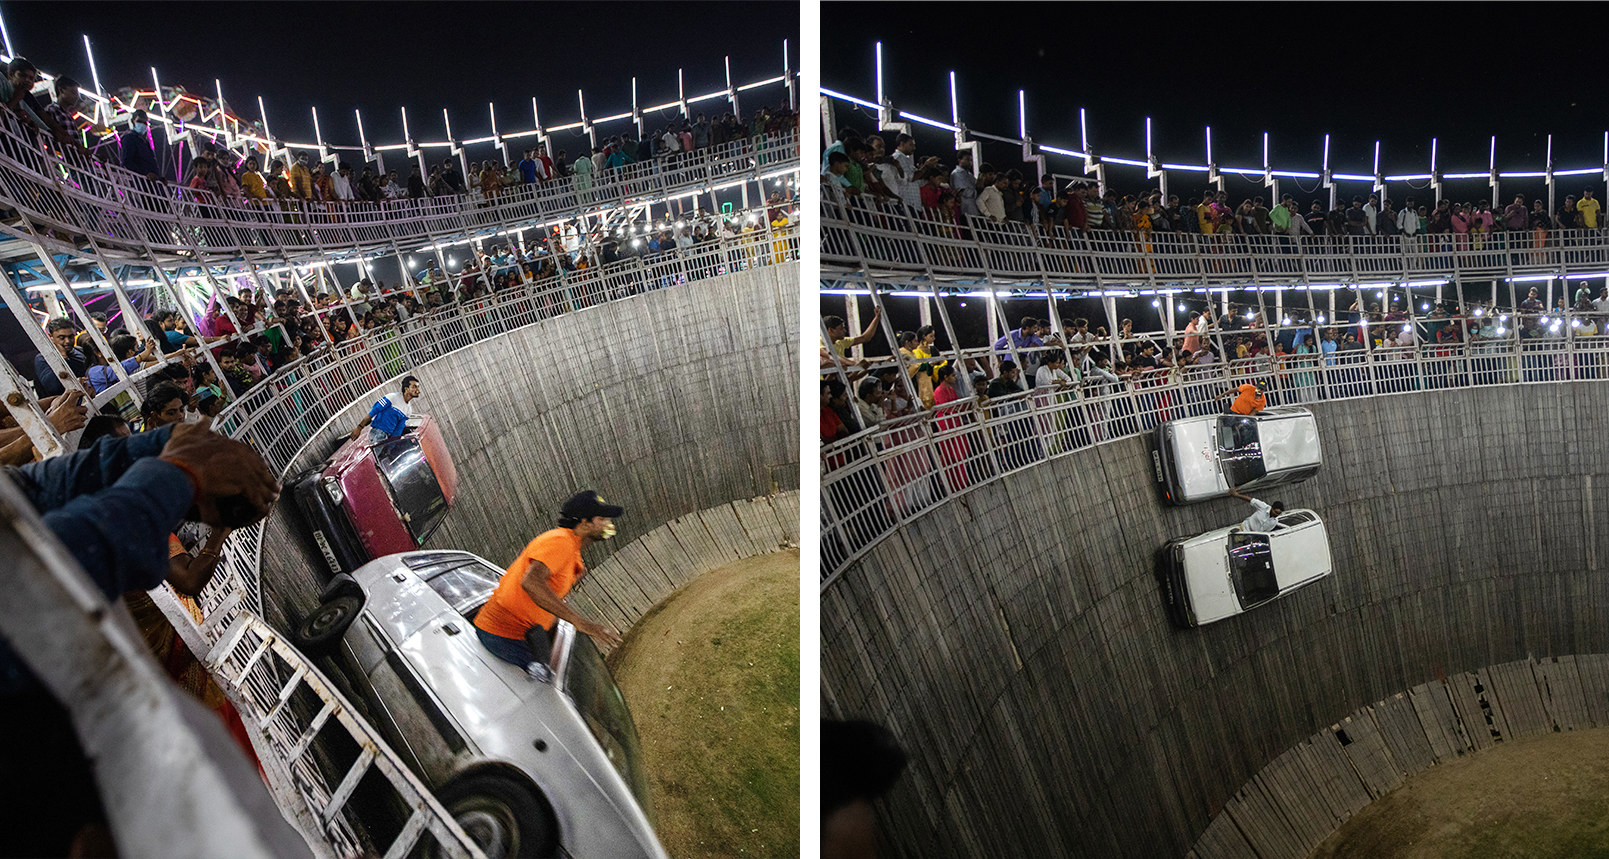 Two images of ben doing stunts in cars in a &quot;Well Of Death.&quot; They are taking tips from the crowd. The daredevils on the passenger sides are hanging out of the windows, sitting upright while the car is vertical to the ground.